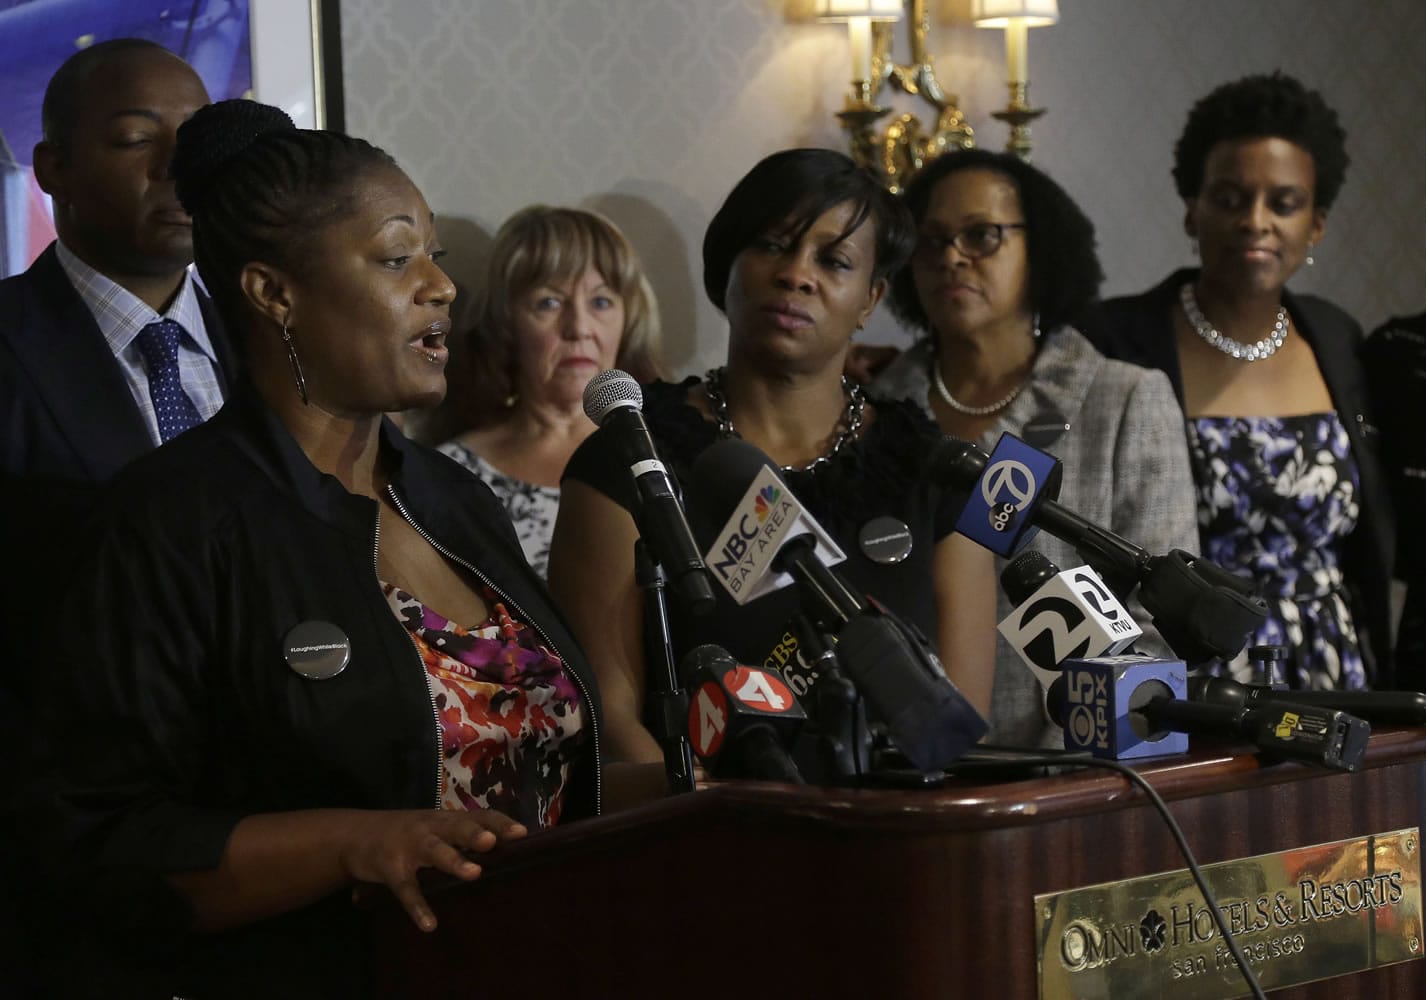 Tira McDonald, left, one of the plaintiffs filing a lawsuit over their ejection from a Napa Valley Wine Train, speaks at a news conference Thursday in San Francisco. Also pictured are attorney Waukeen Q. McCoy, from left rear, and plaintiffs Linda Carlson, Lisa Johnson, Sandra Jamerson and Allisa Carr. A group of mostly black women who were ejected from a Northern California wine country train this summer say they felt humiliated.